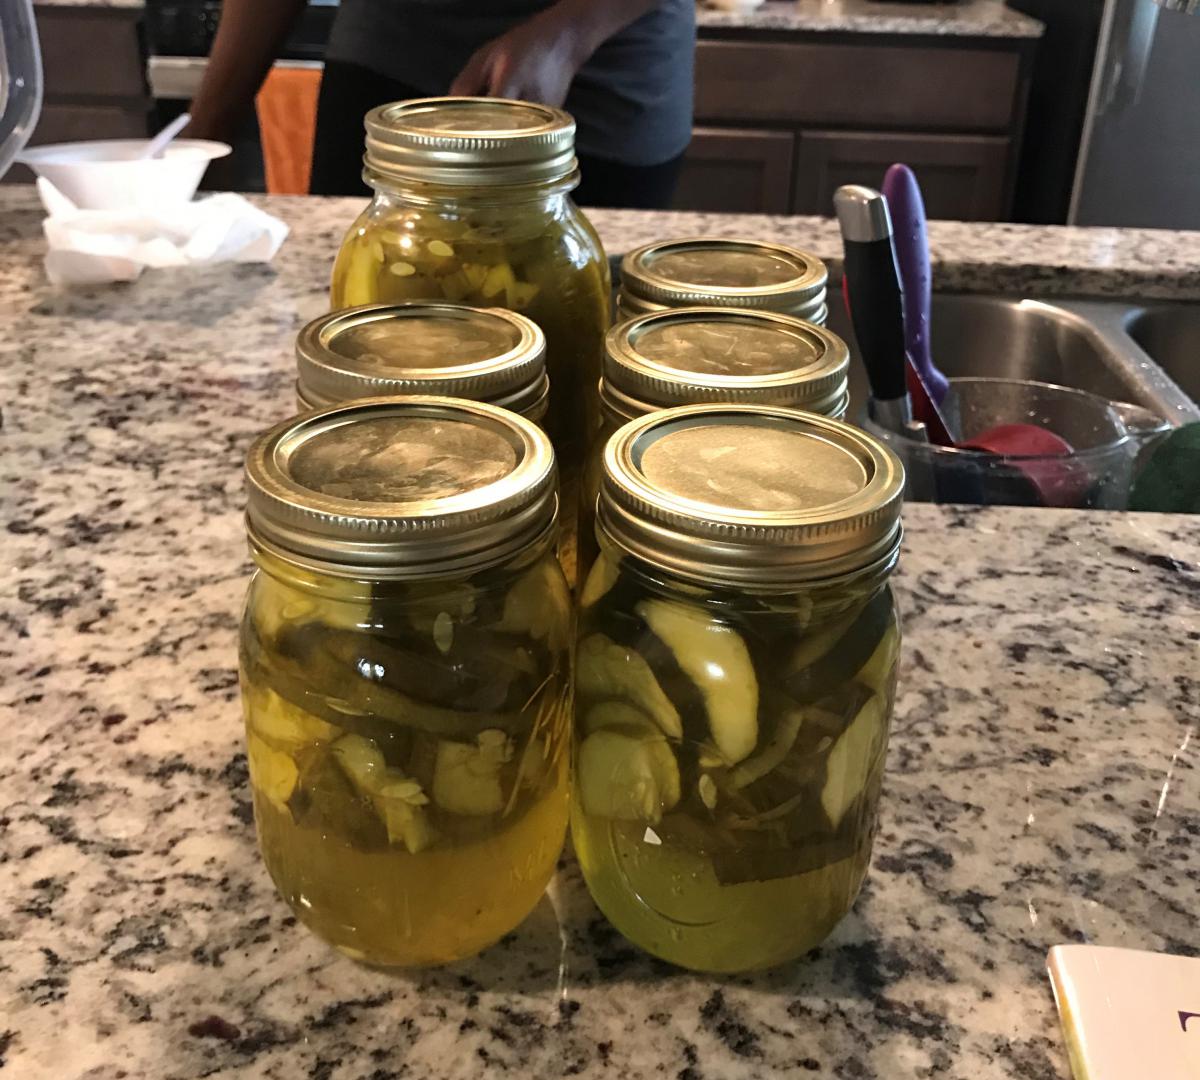 Six mason jars filled with homemade pickles on a granite countertop.